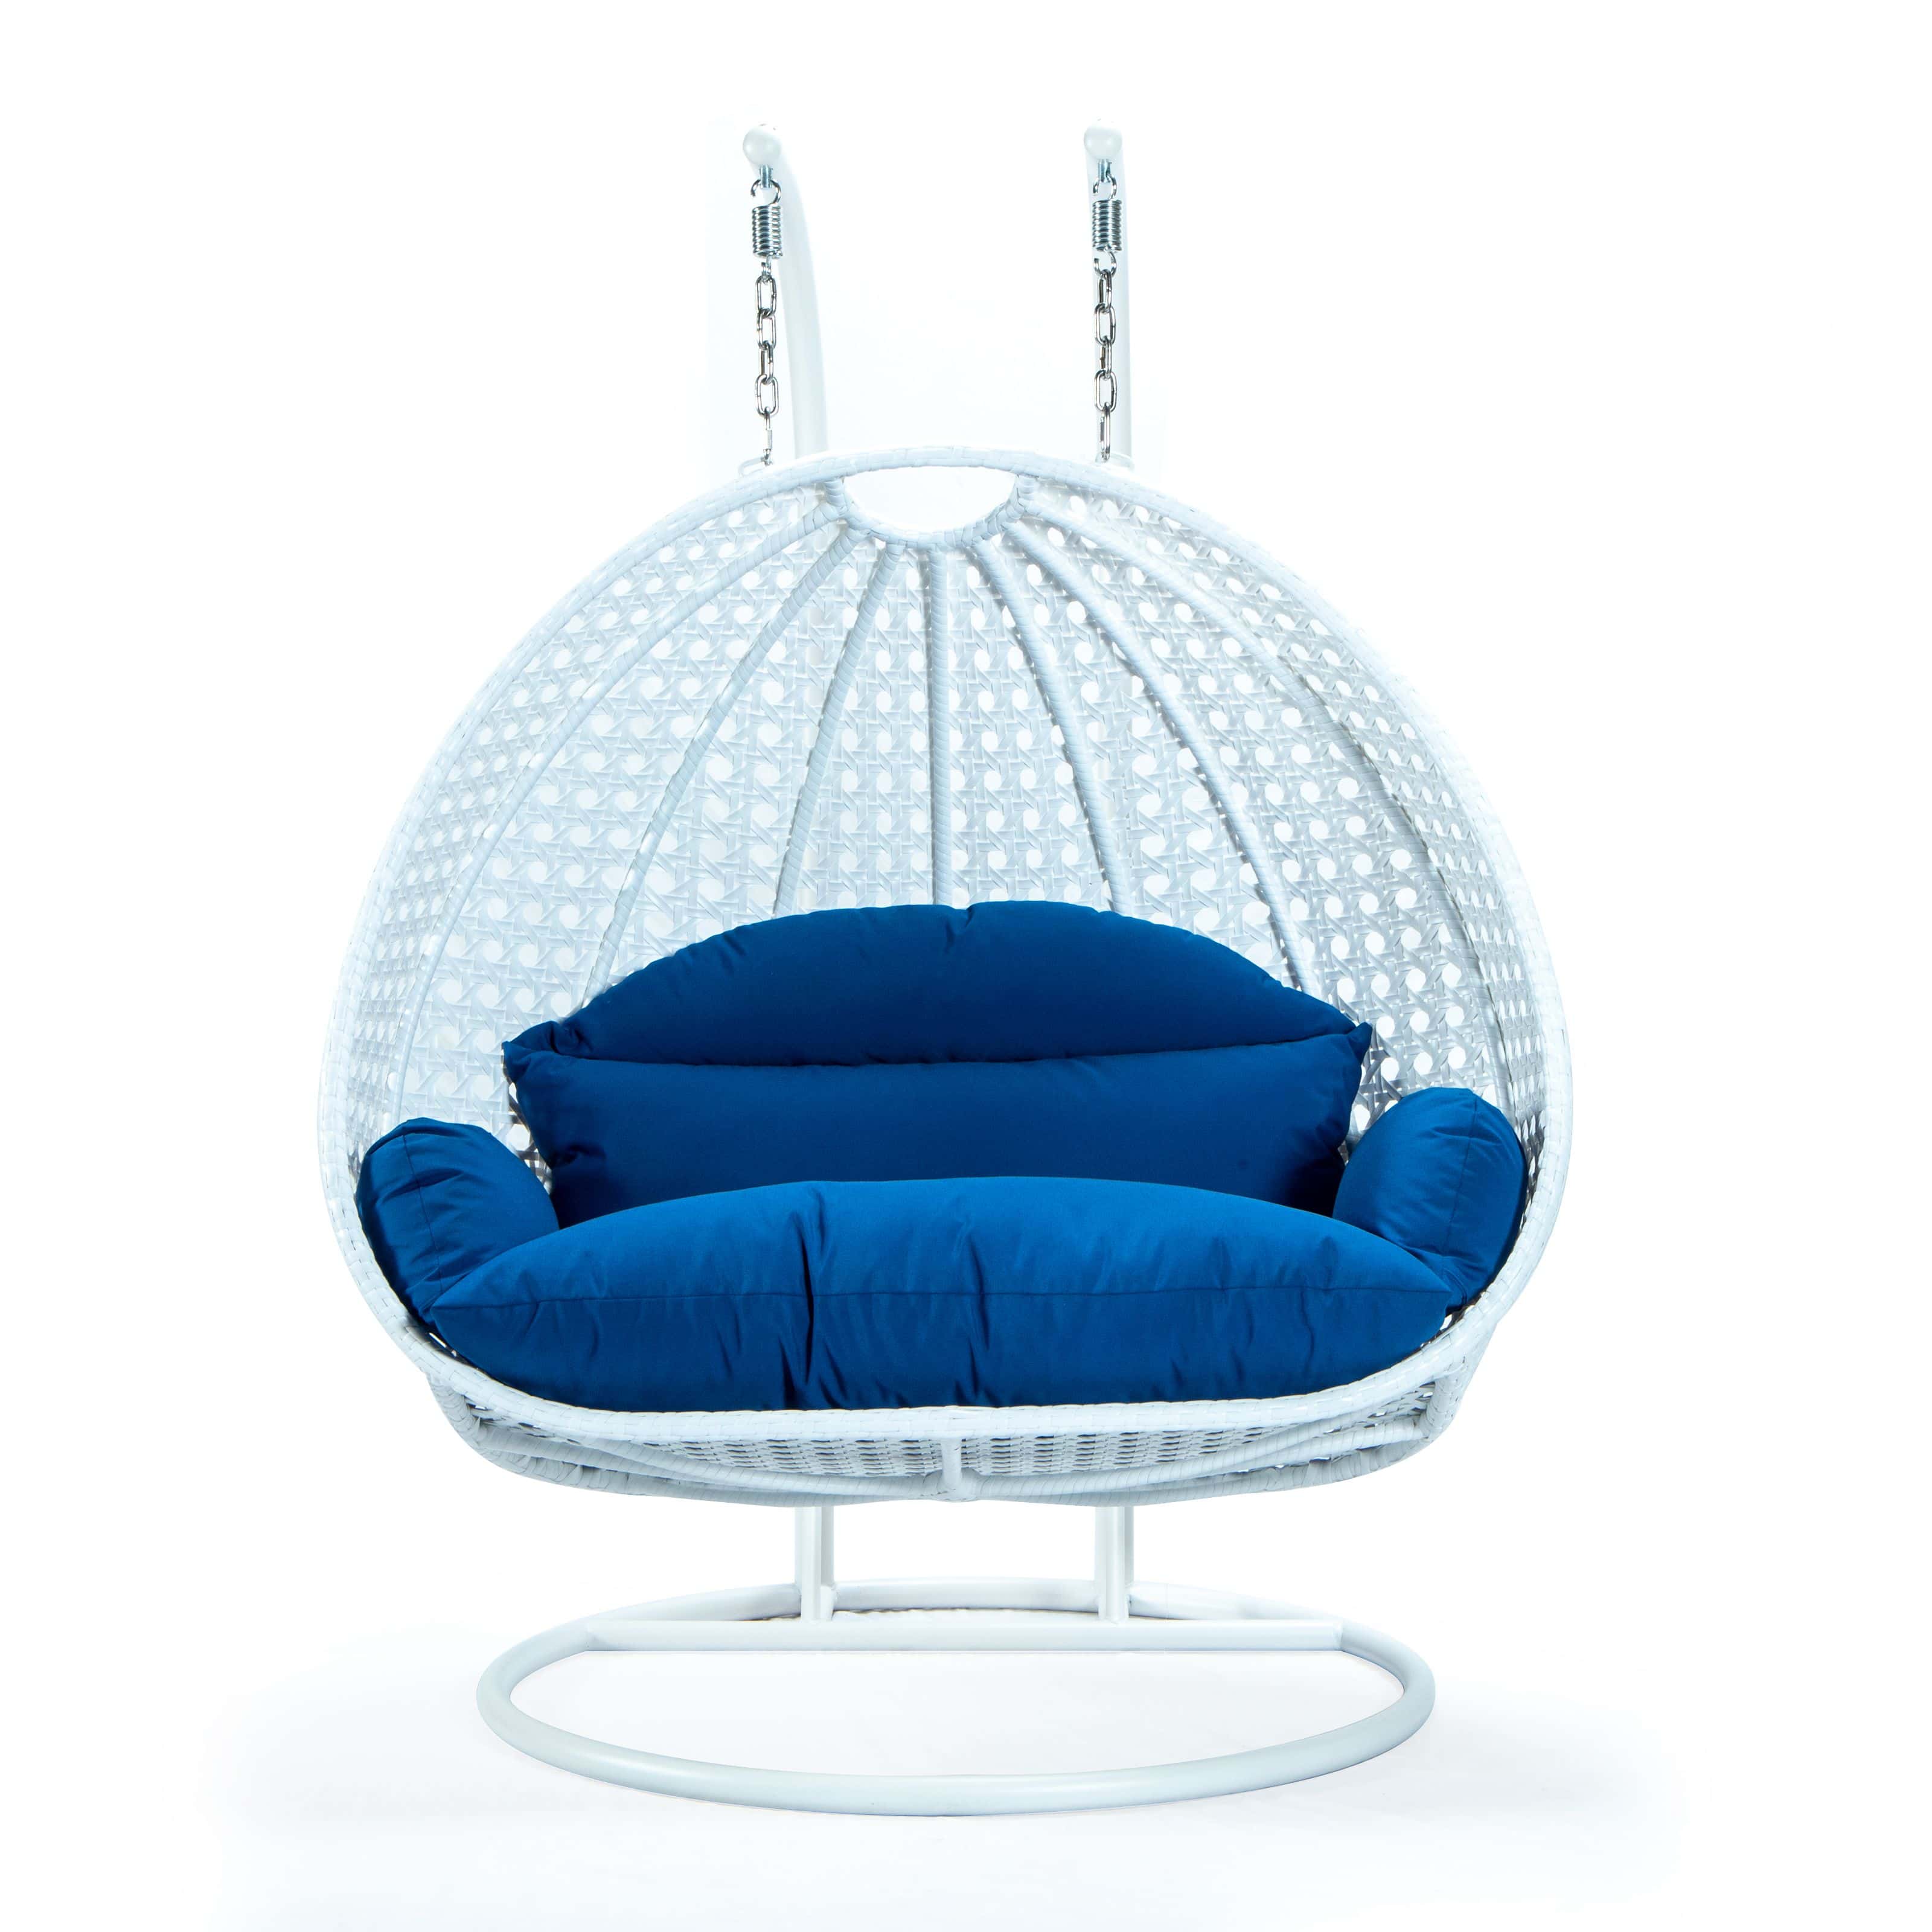 Wicker Hanging Egg Swing Chair Double Seater White W Blue Seat By Leisuremod